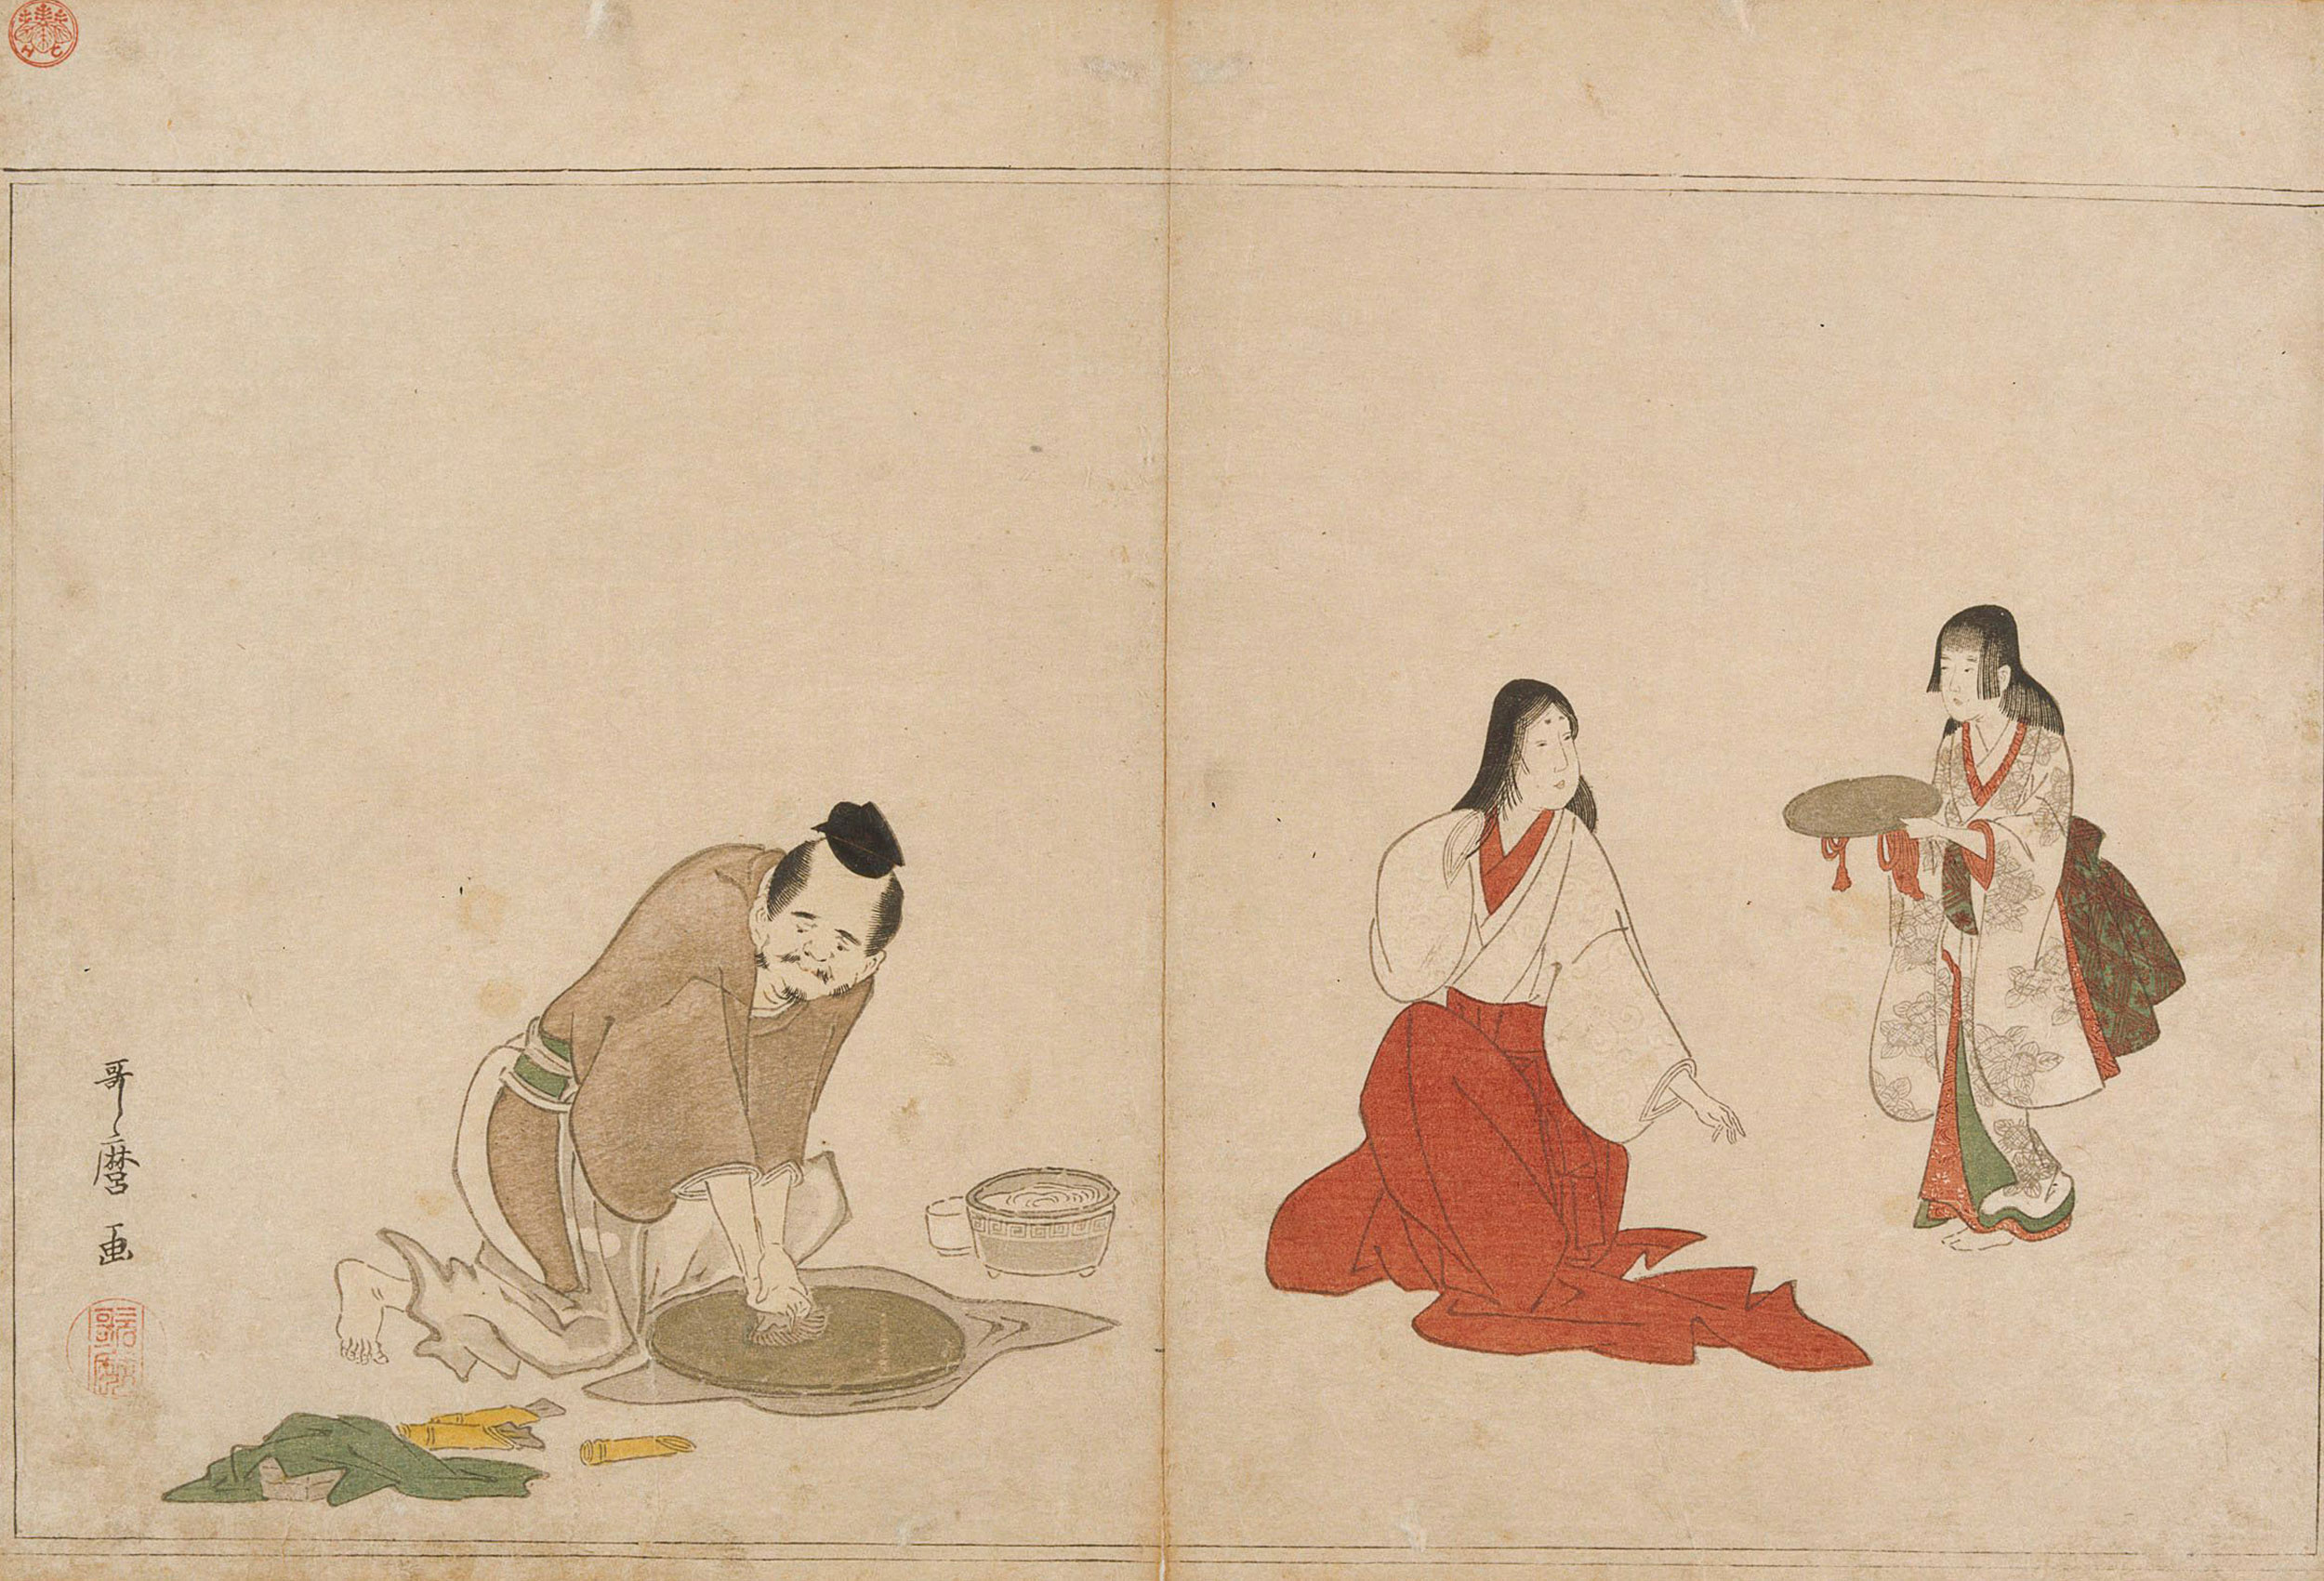 Kitagawa Utamaro Mirror polishing from the book Spring colours [illustrated book] 1794, Art Gallery of New South Wales